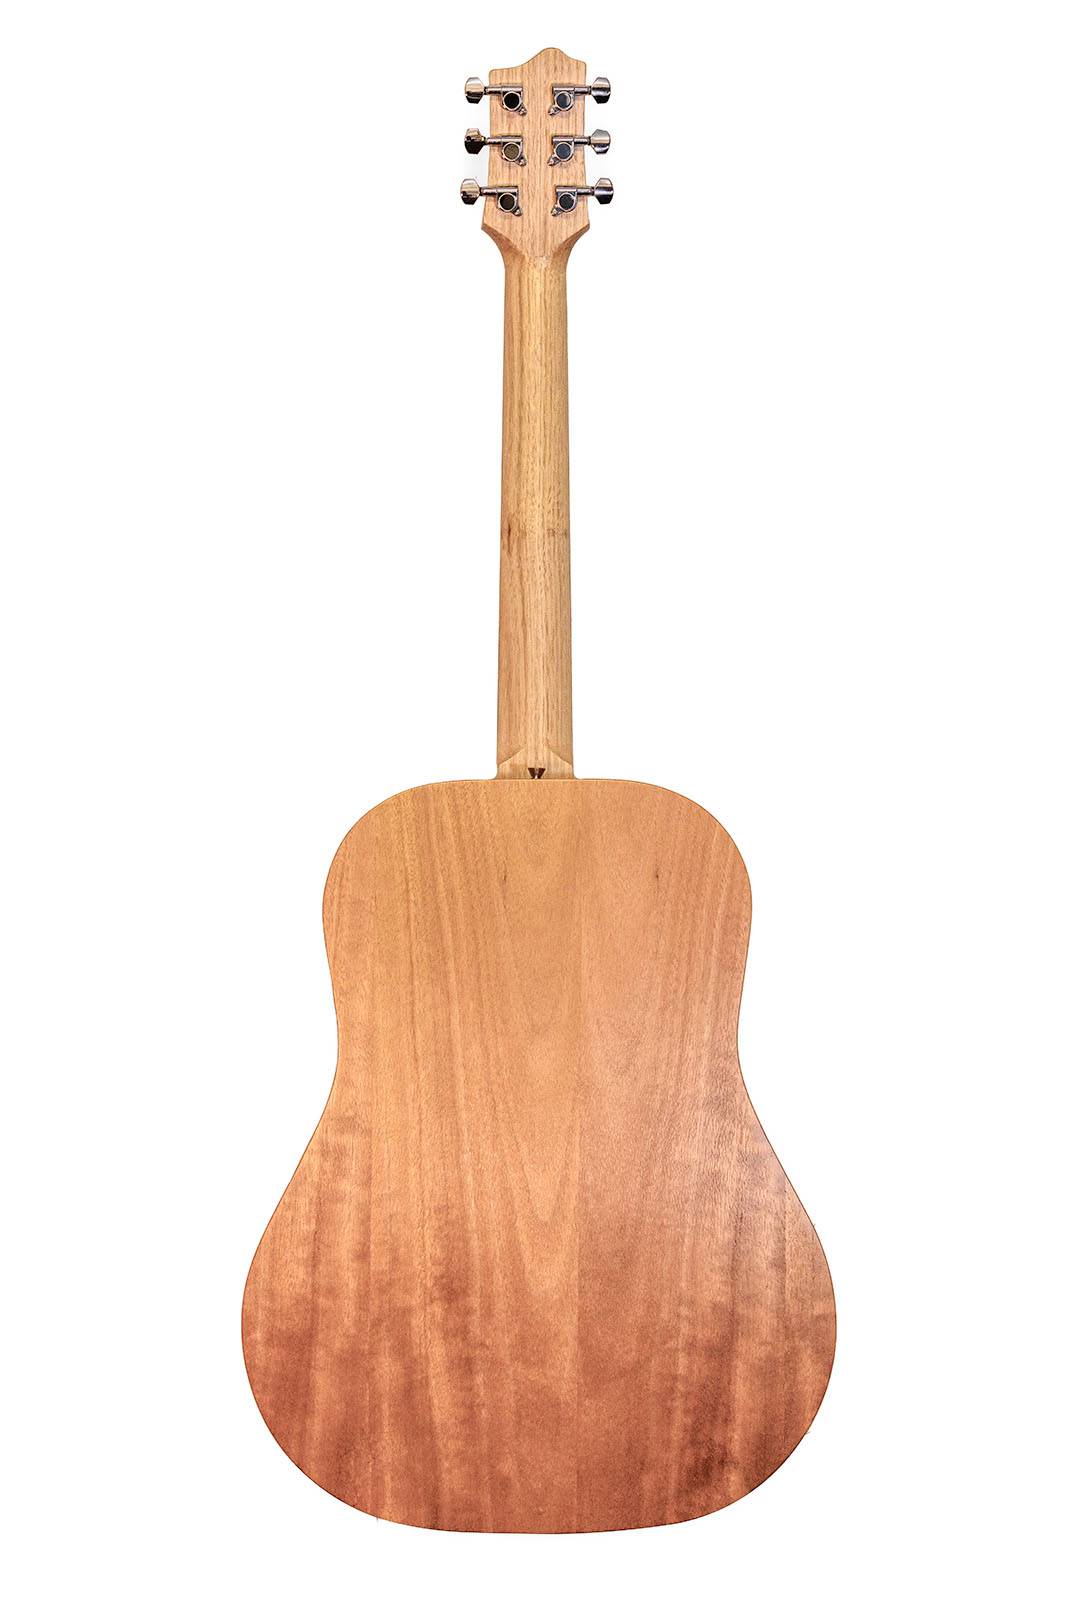 PRATLEY SL DREADNOUGHT LAYERED MAPLE BACK AND SIDES, SOLID BUNYA TOP W/ PICKUP - Joondalup Music Centre